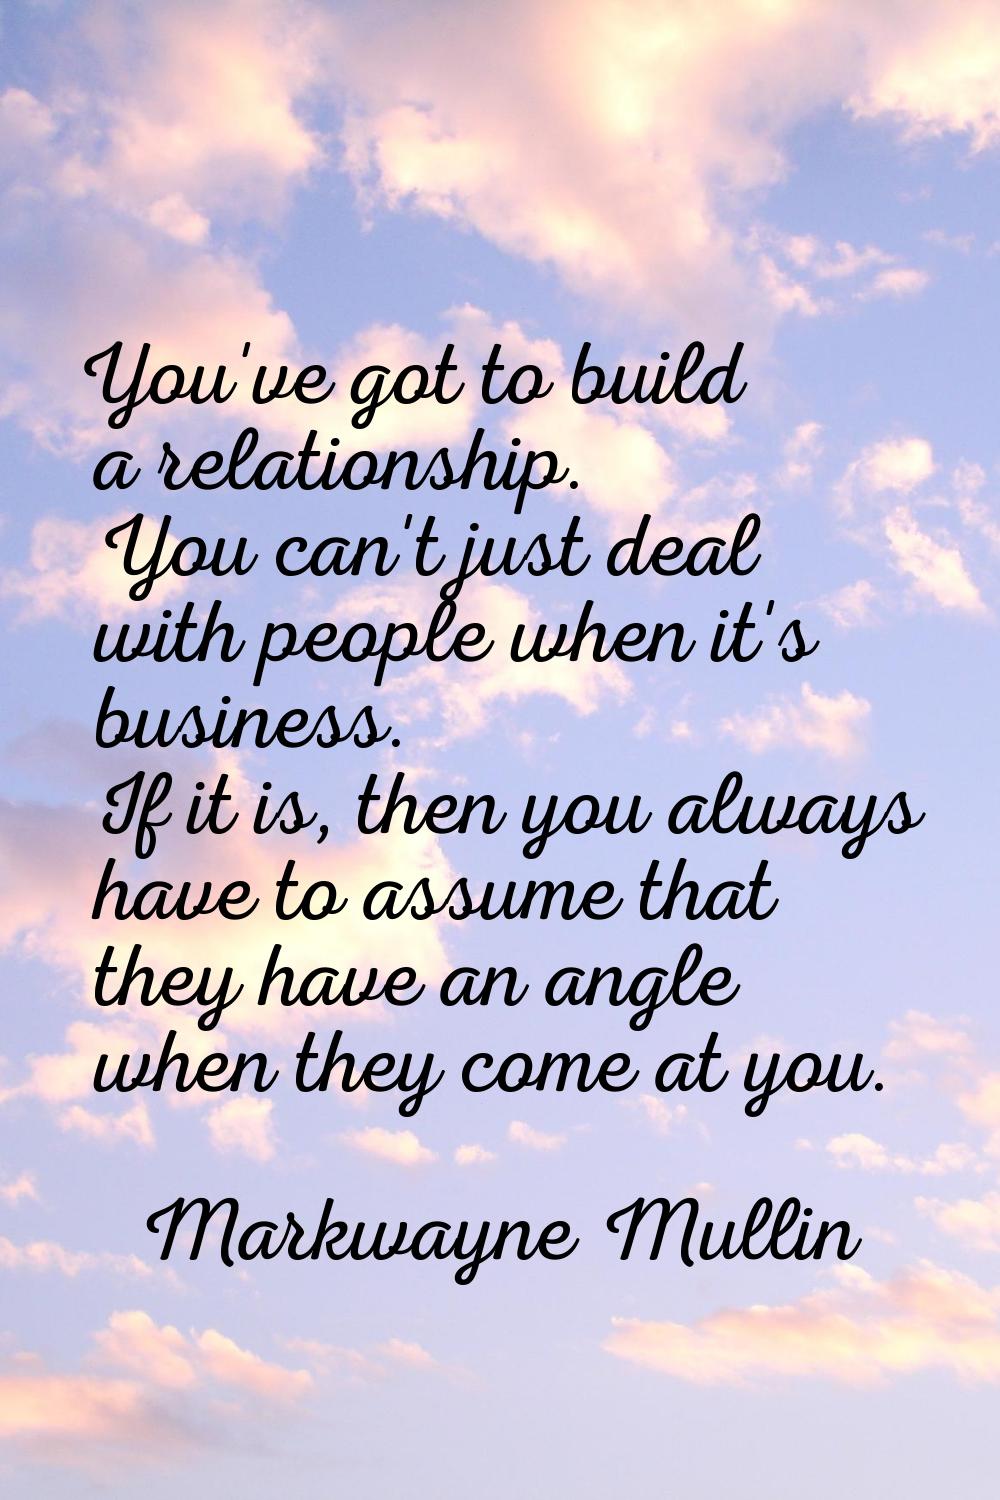 You've got to build a relationship. You can't just deal with people when it's business. If it is, t